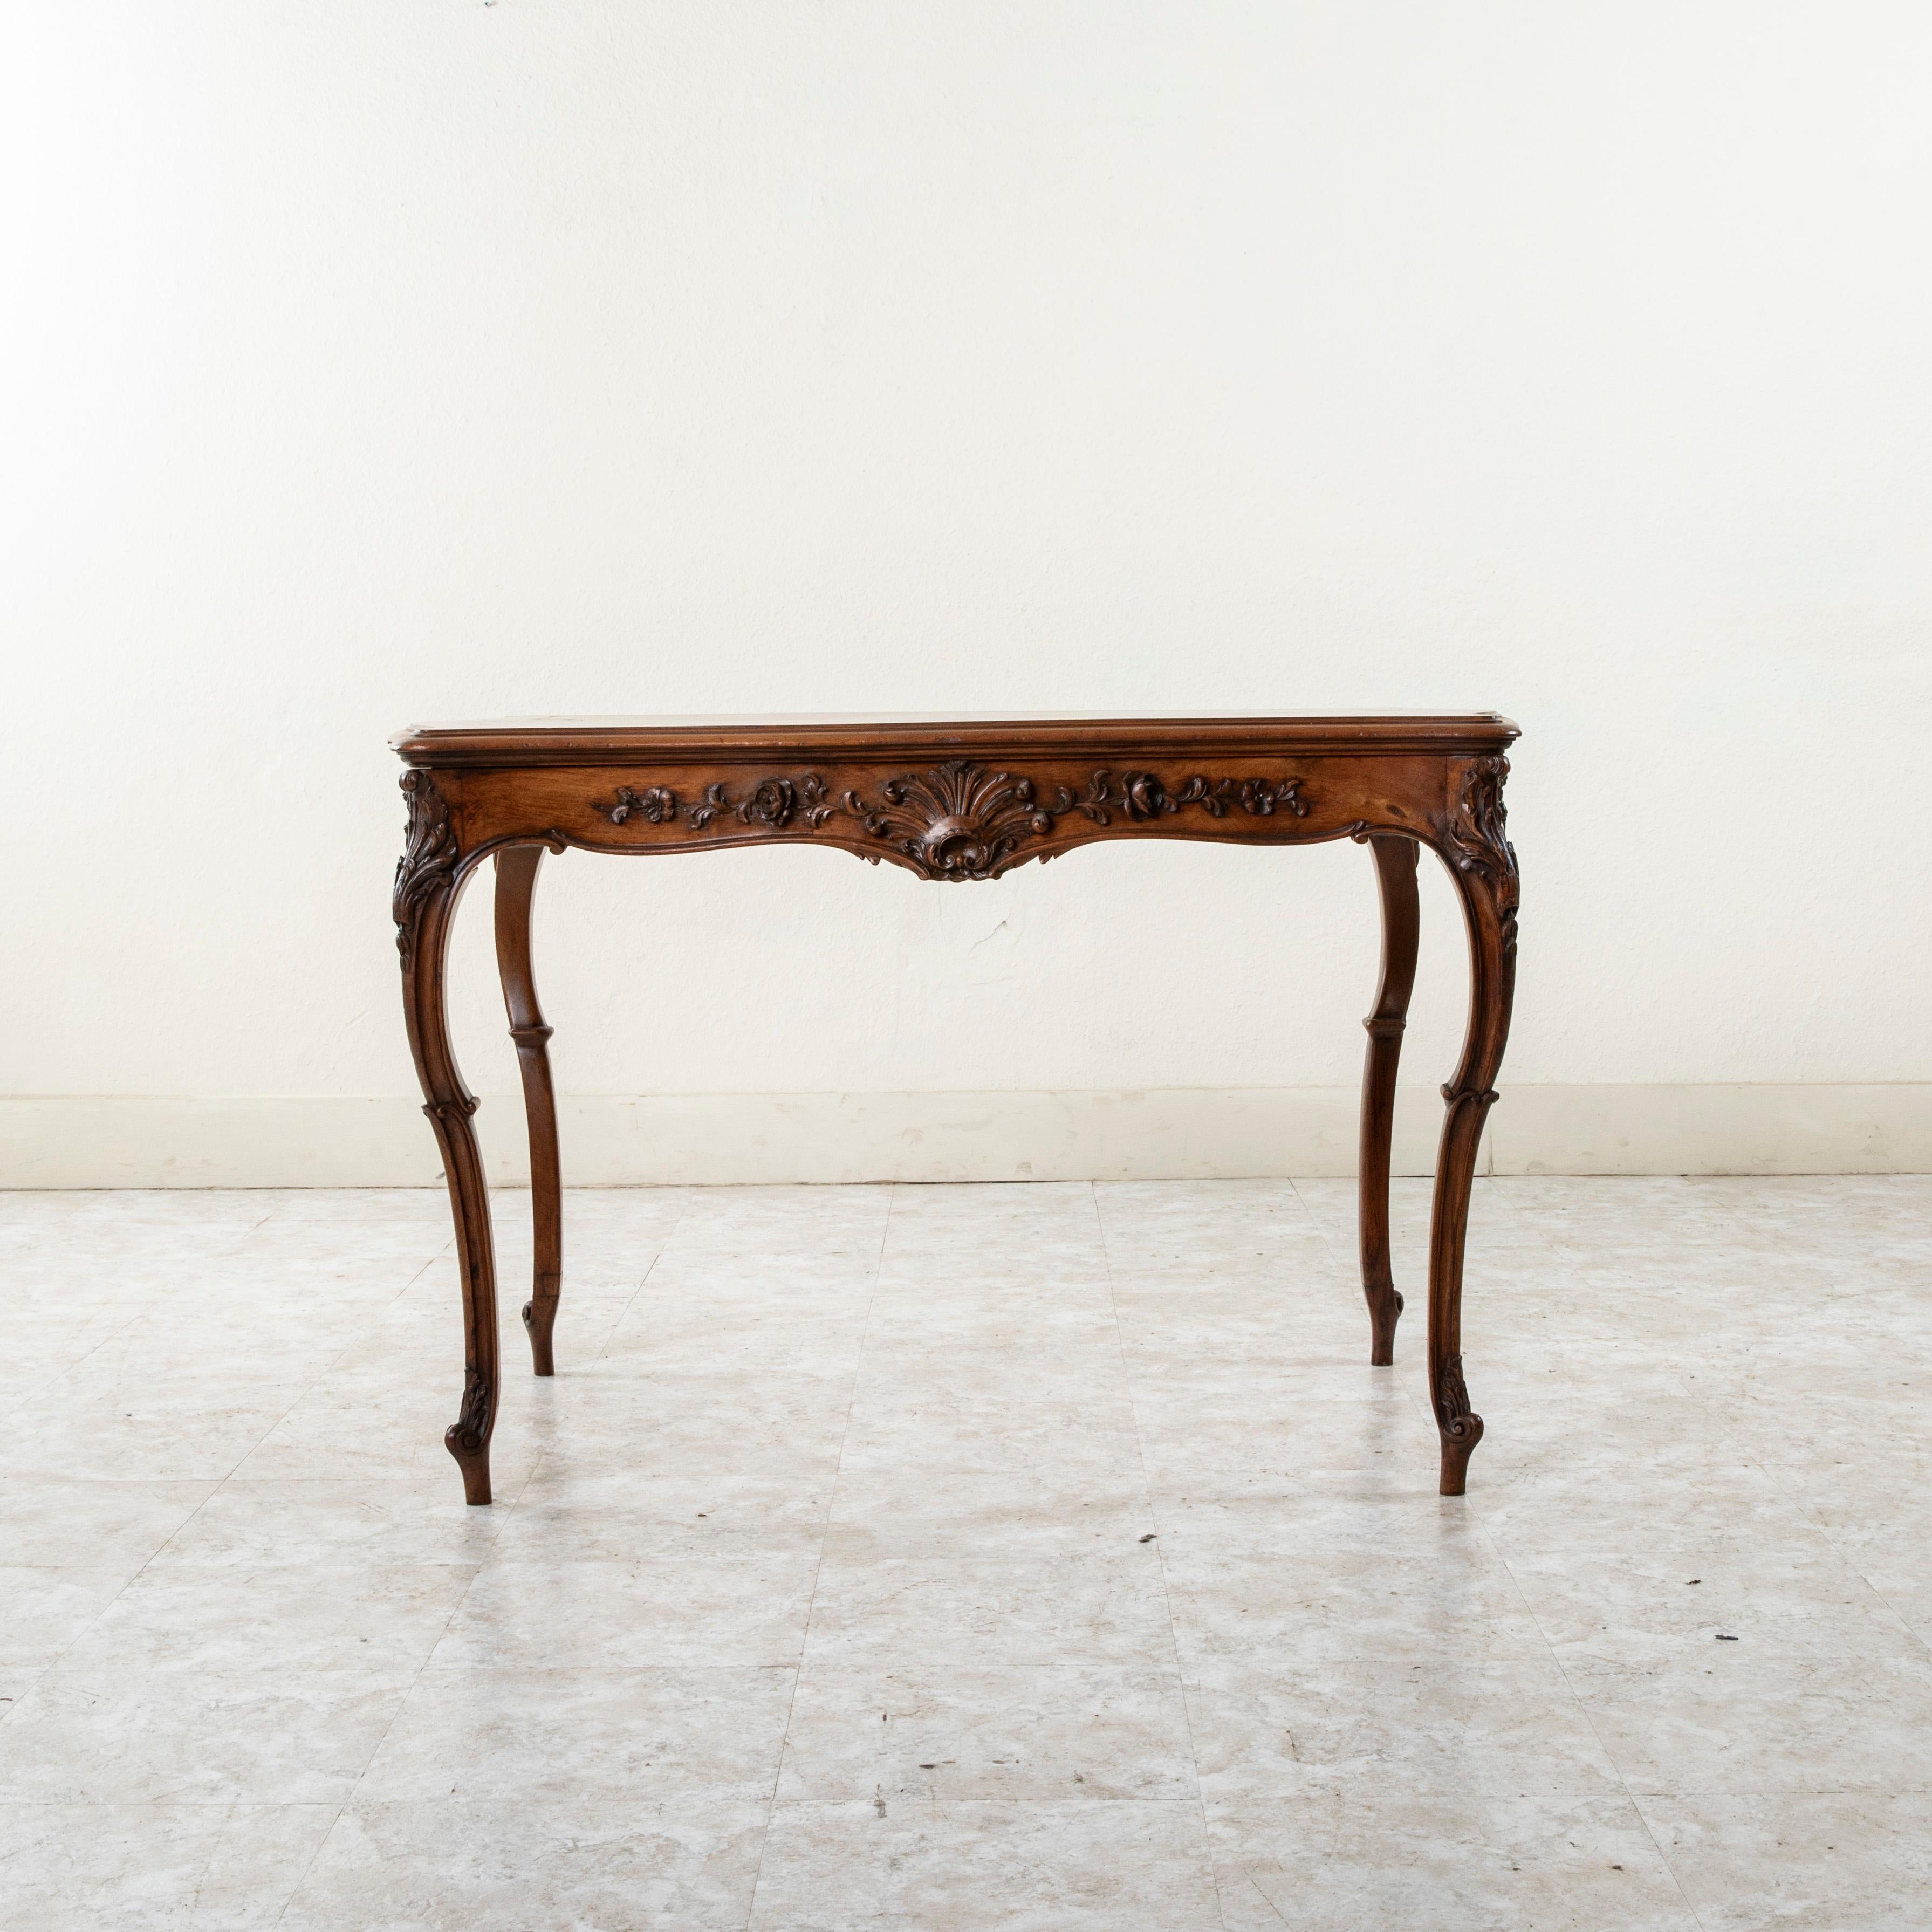 Hand-Carved Late 19th Century French Louis XV Style Hand Carved Walnut Desk or Writing Table